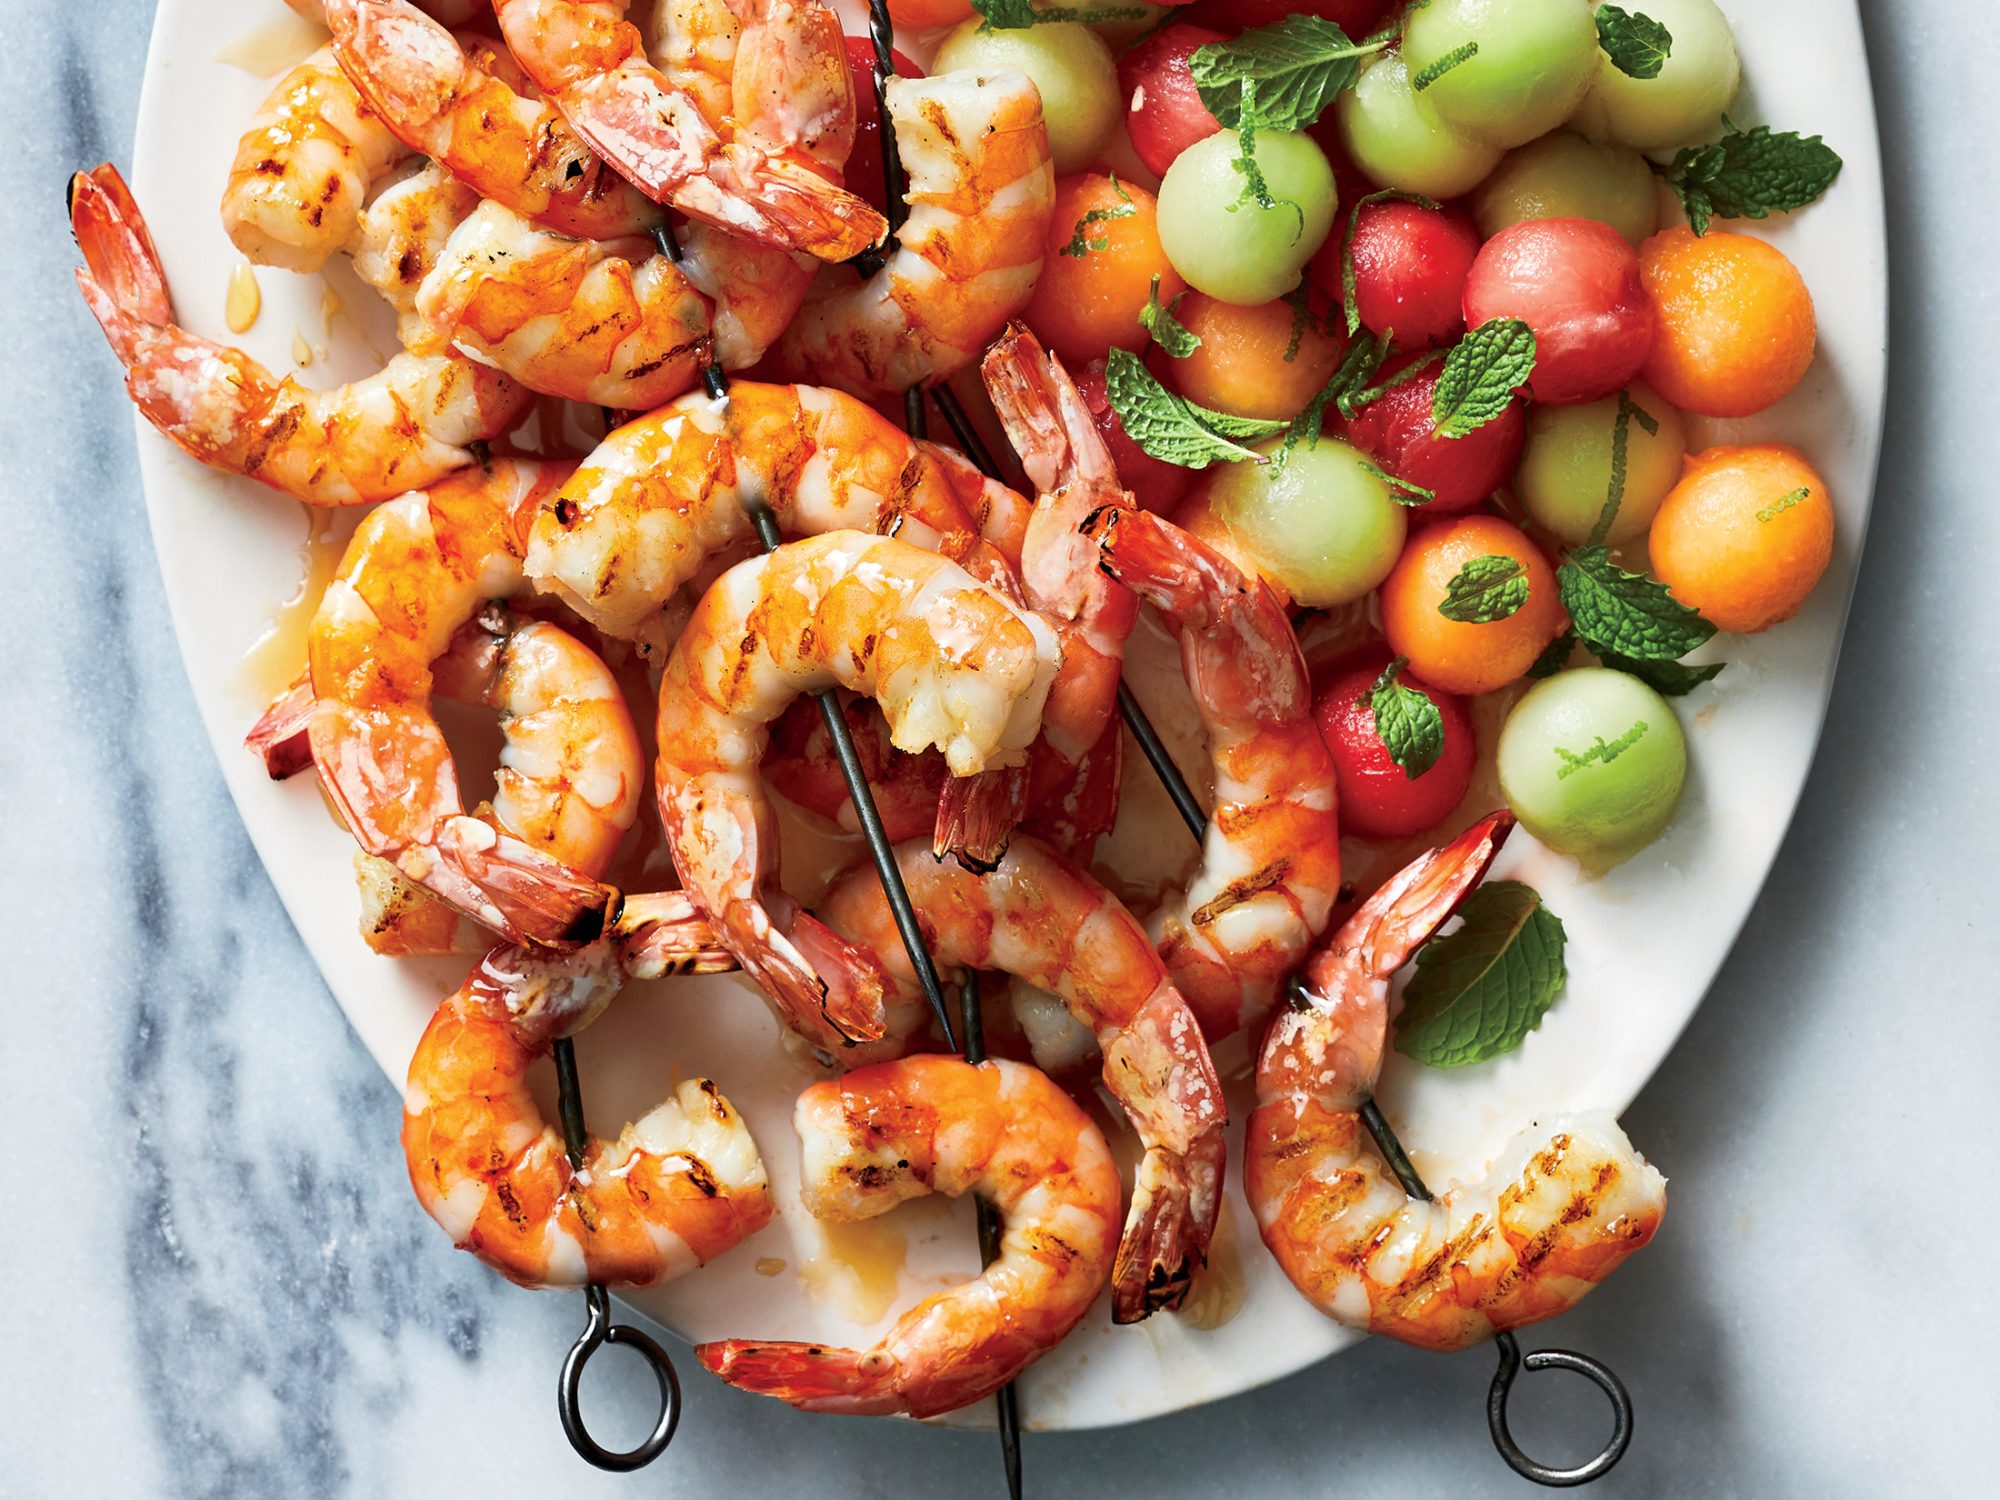 Shrimp Kebabs with Mint and Melon Salad